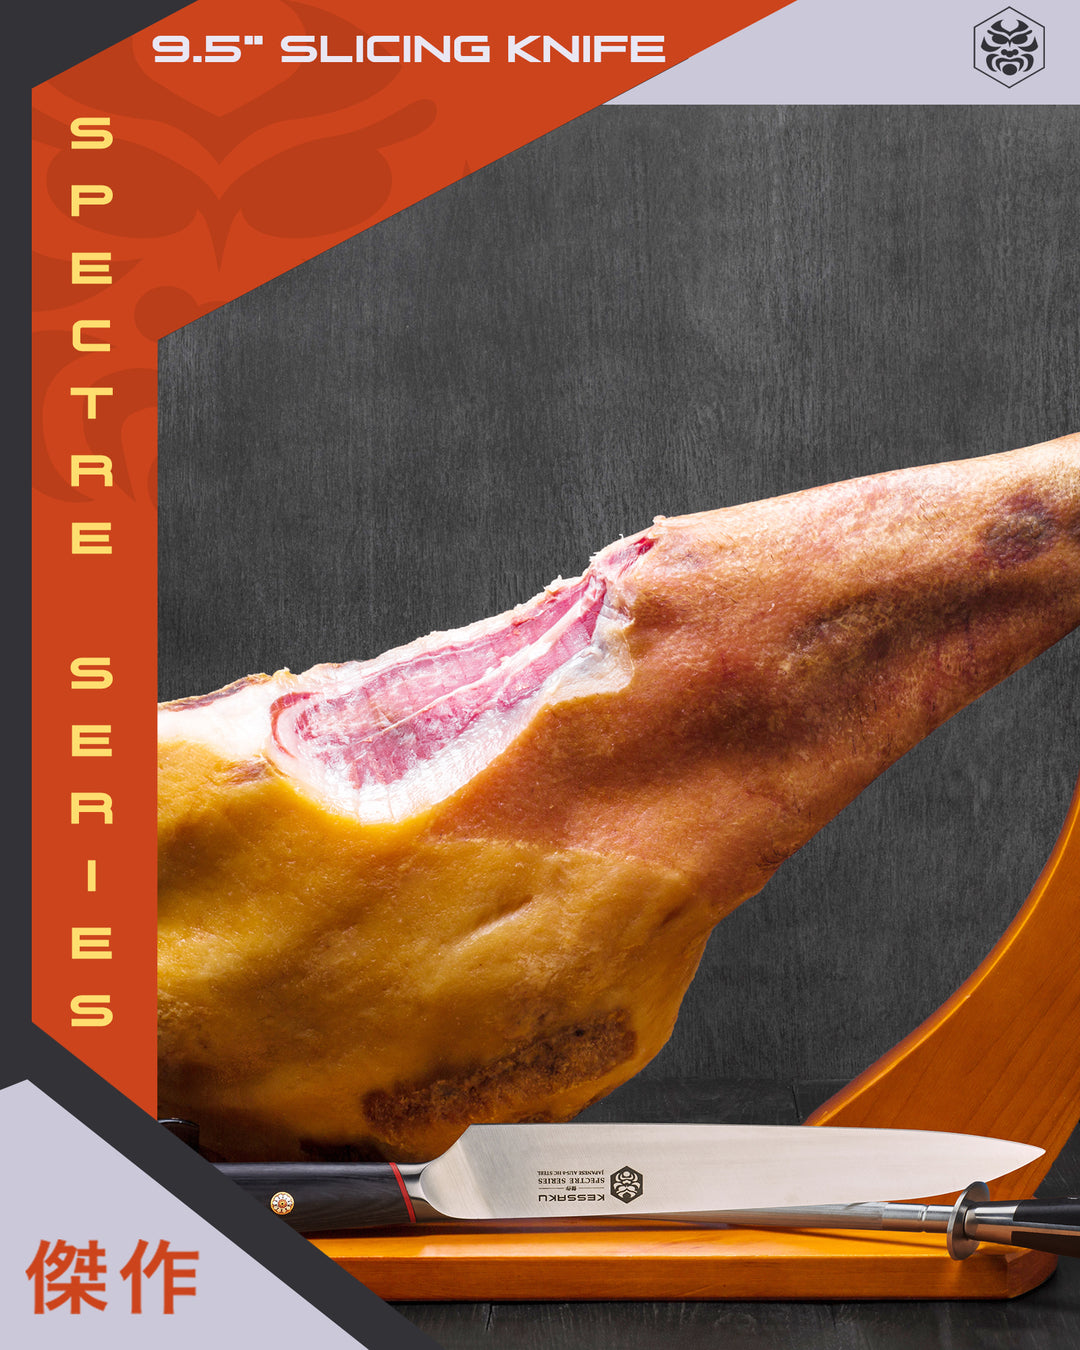 The Spectre Series 9.5-In Slicing Knife being used at a Jamón serving station